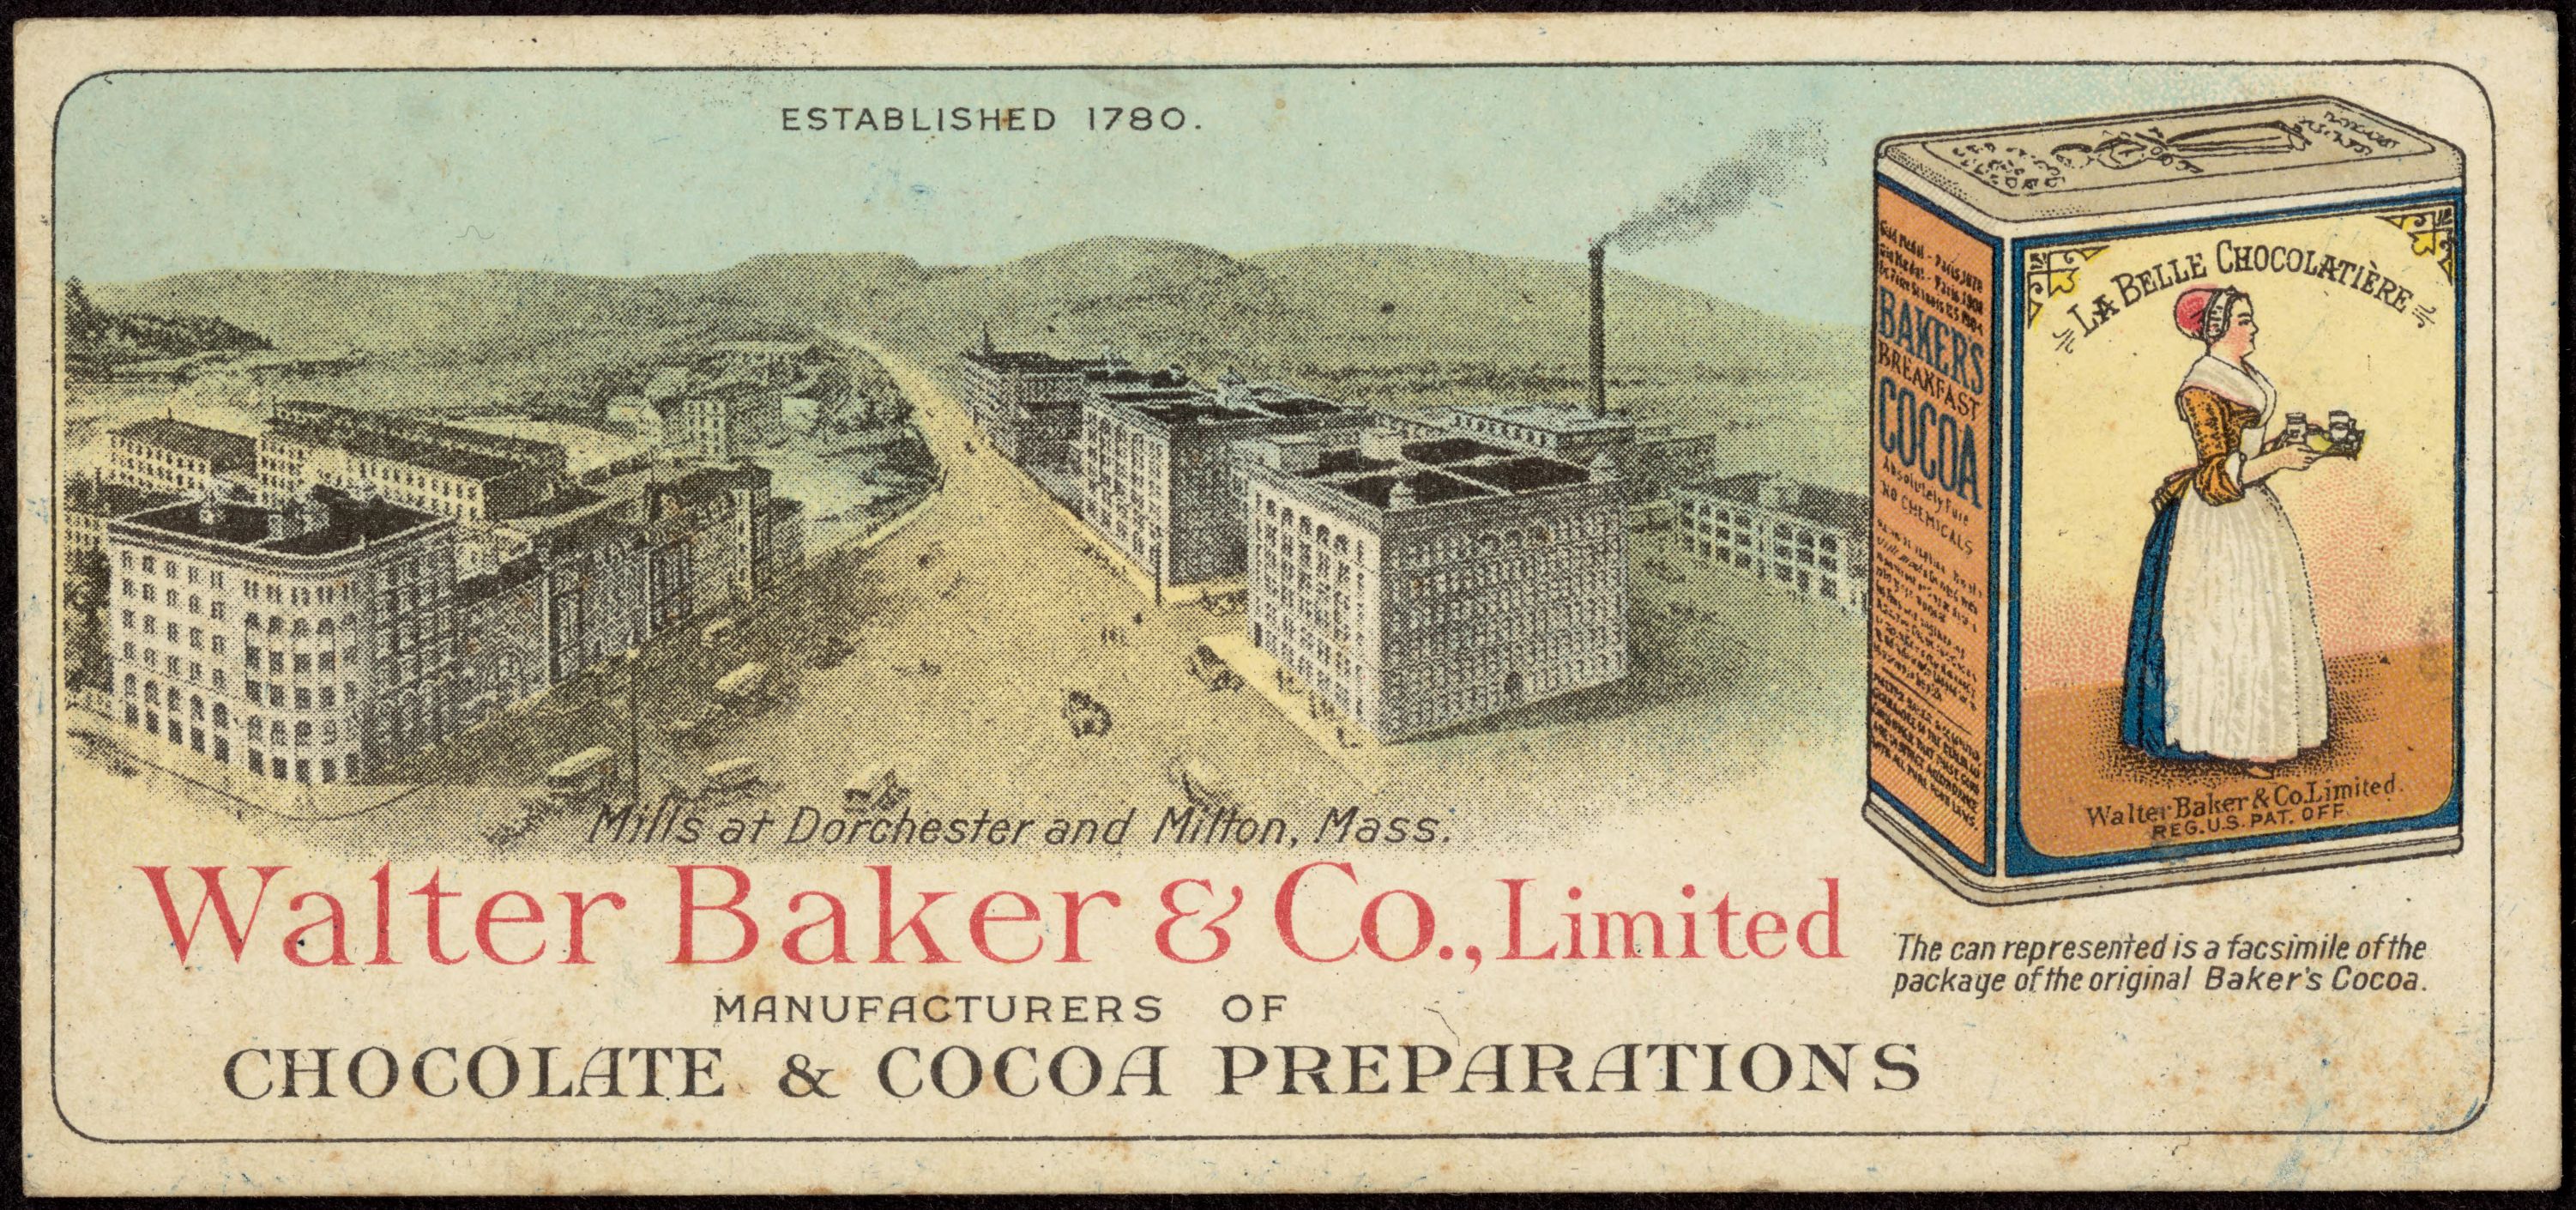 This advertising card from the late nineteenth lists the Walter Baker &amp; Co. as manufacturers of chocolate and cocoa preparation.